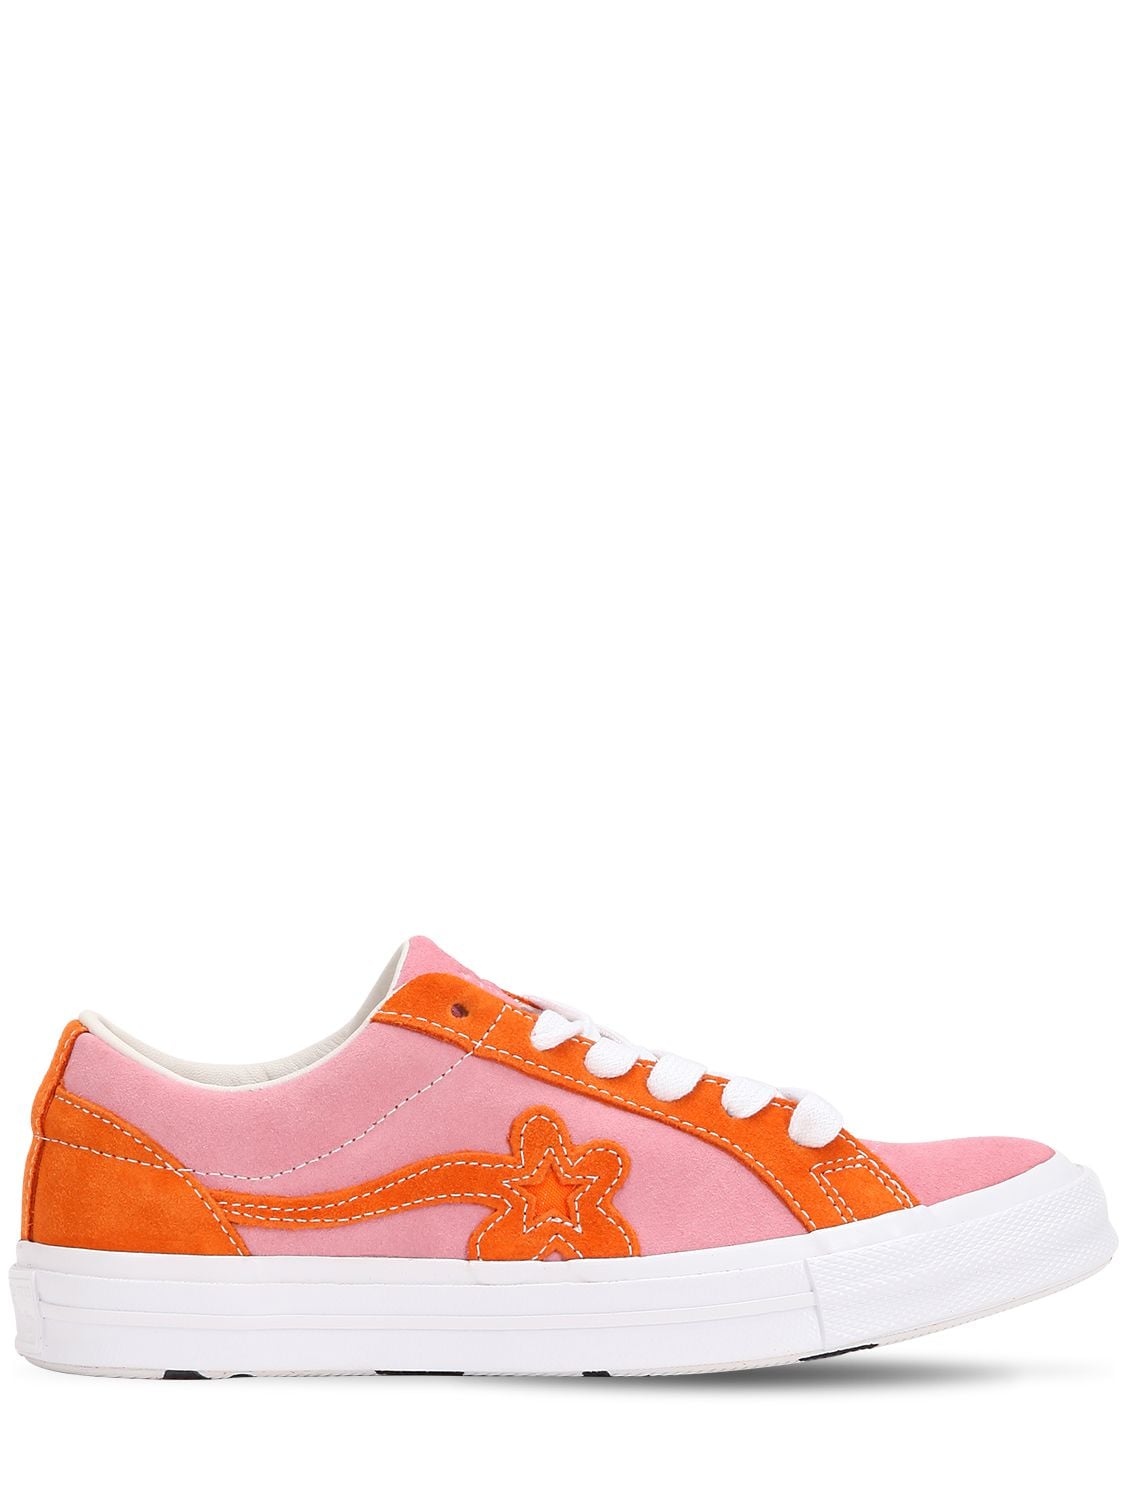 Converse One Star Golf Le Fleur Suede Sneakers In Candy Pink